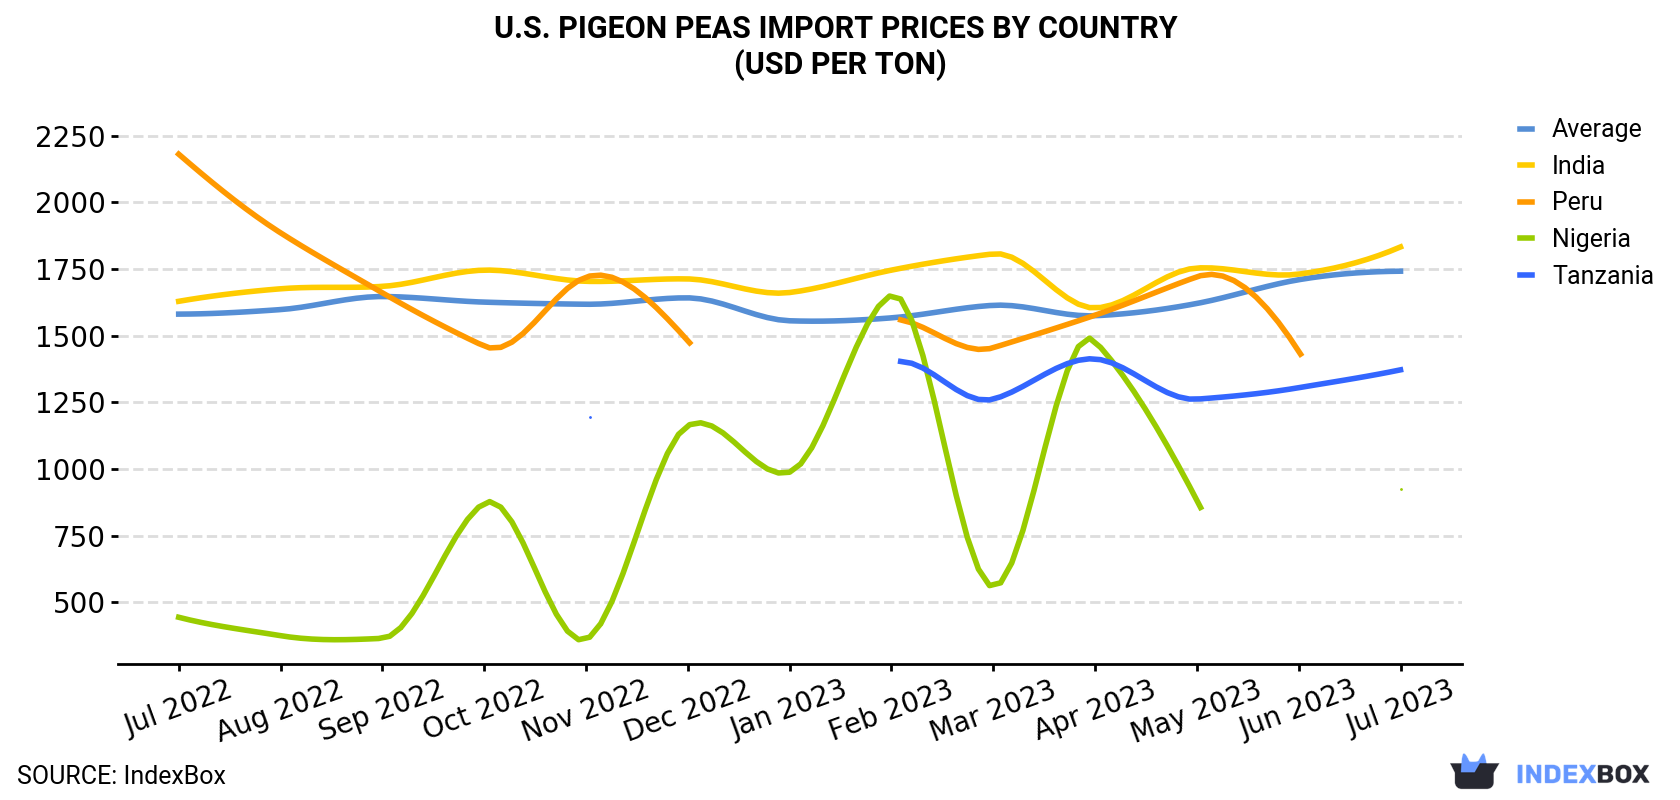 U.S. Pigeon Peas Import Prices By Country (USD Per Ton)